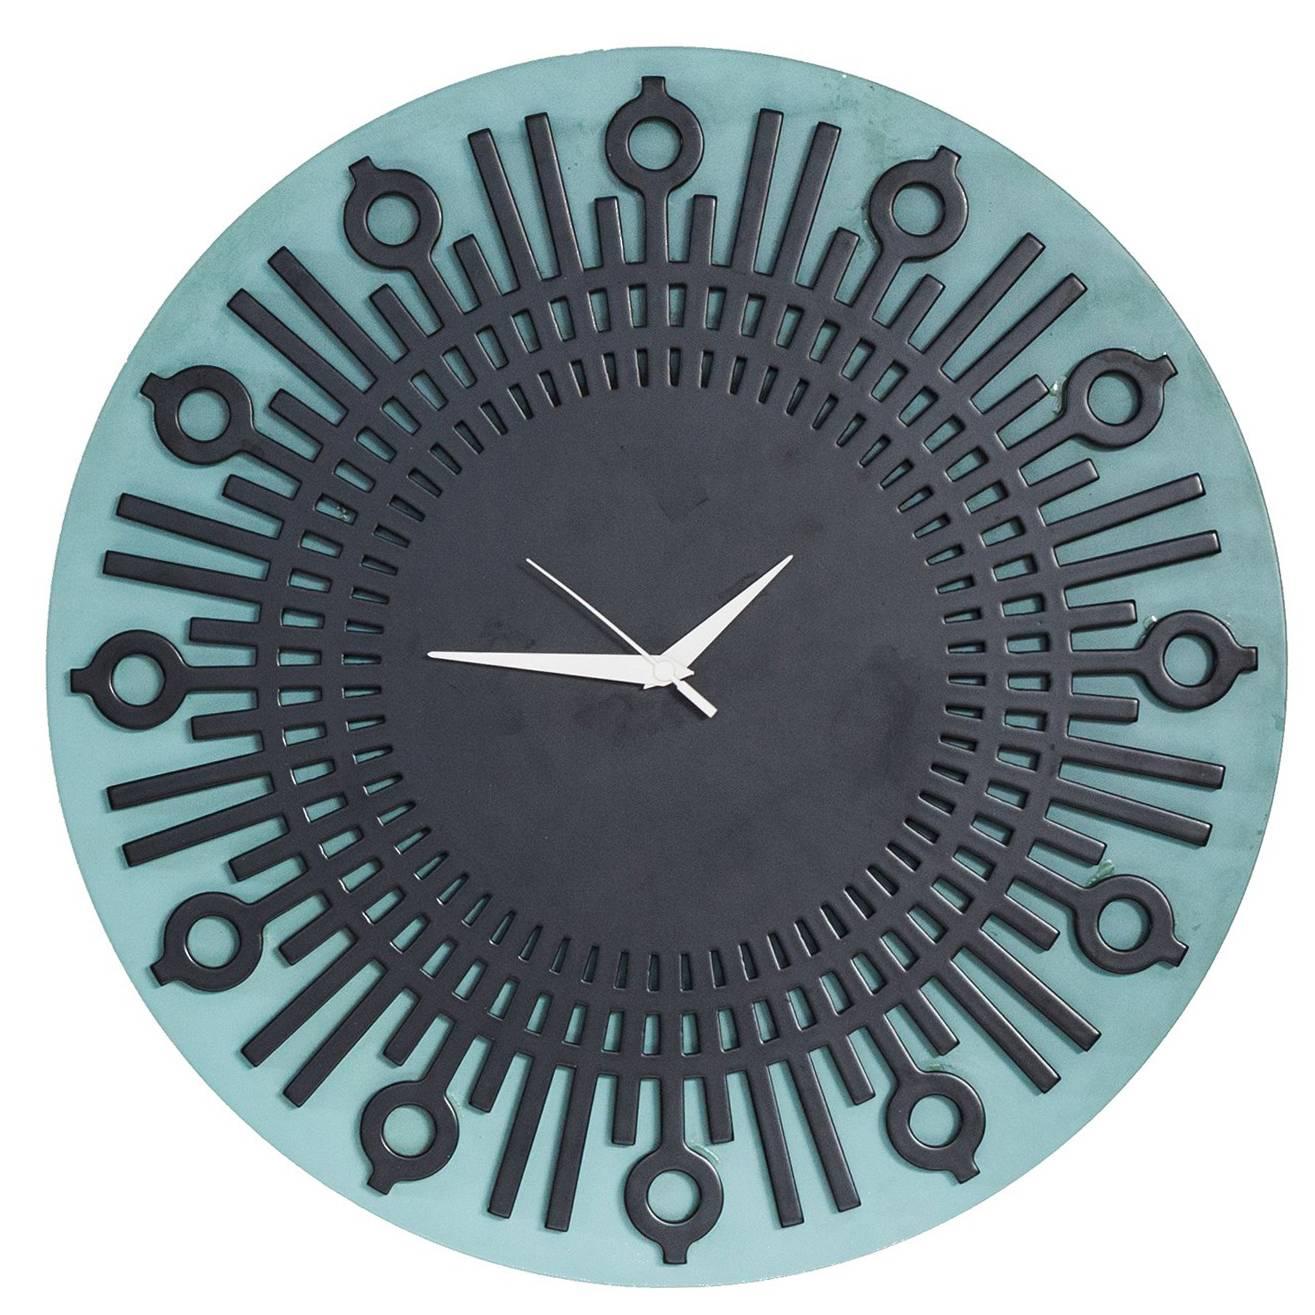 Coat Brazilian Contemporary Lacquer Wall Clock by Lattoog